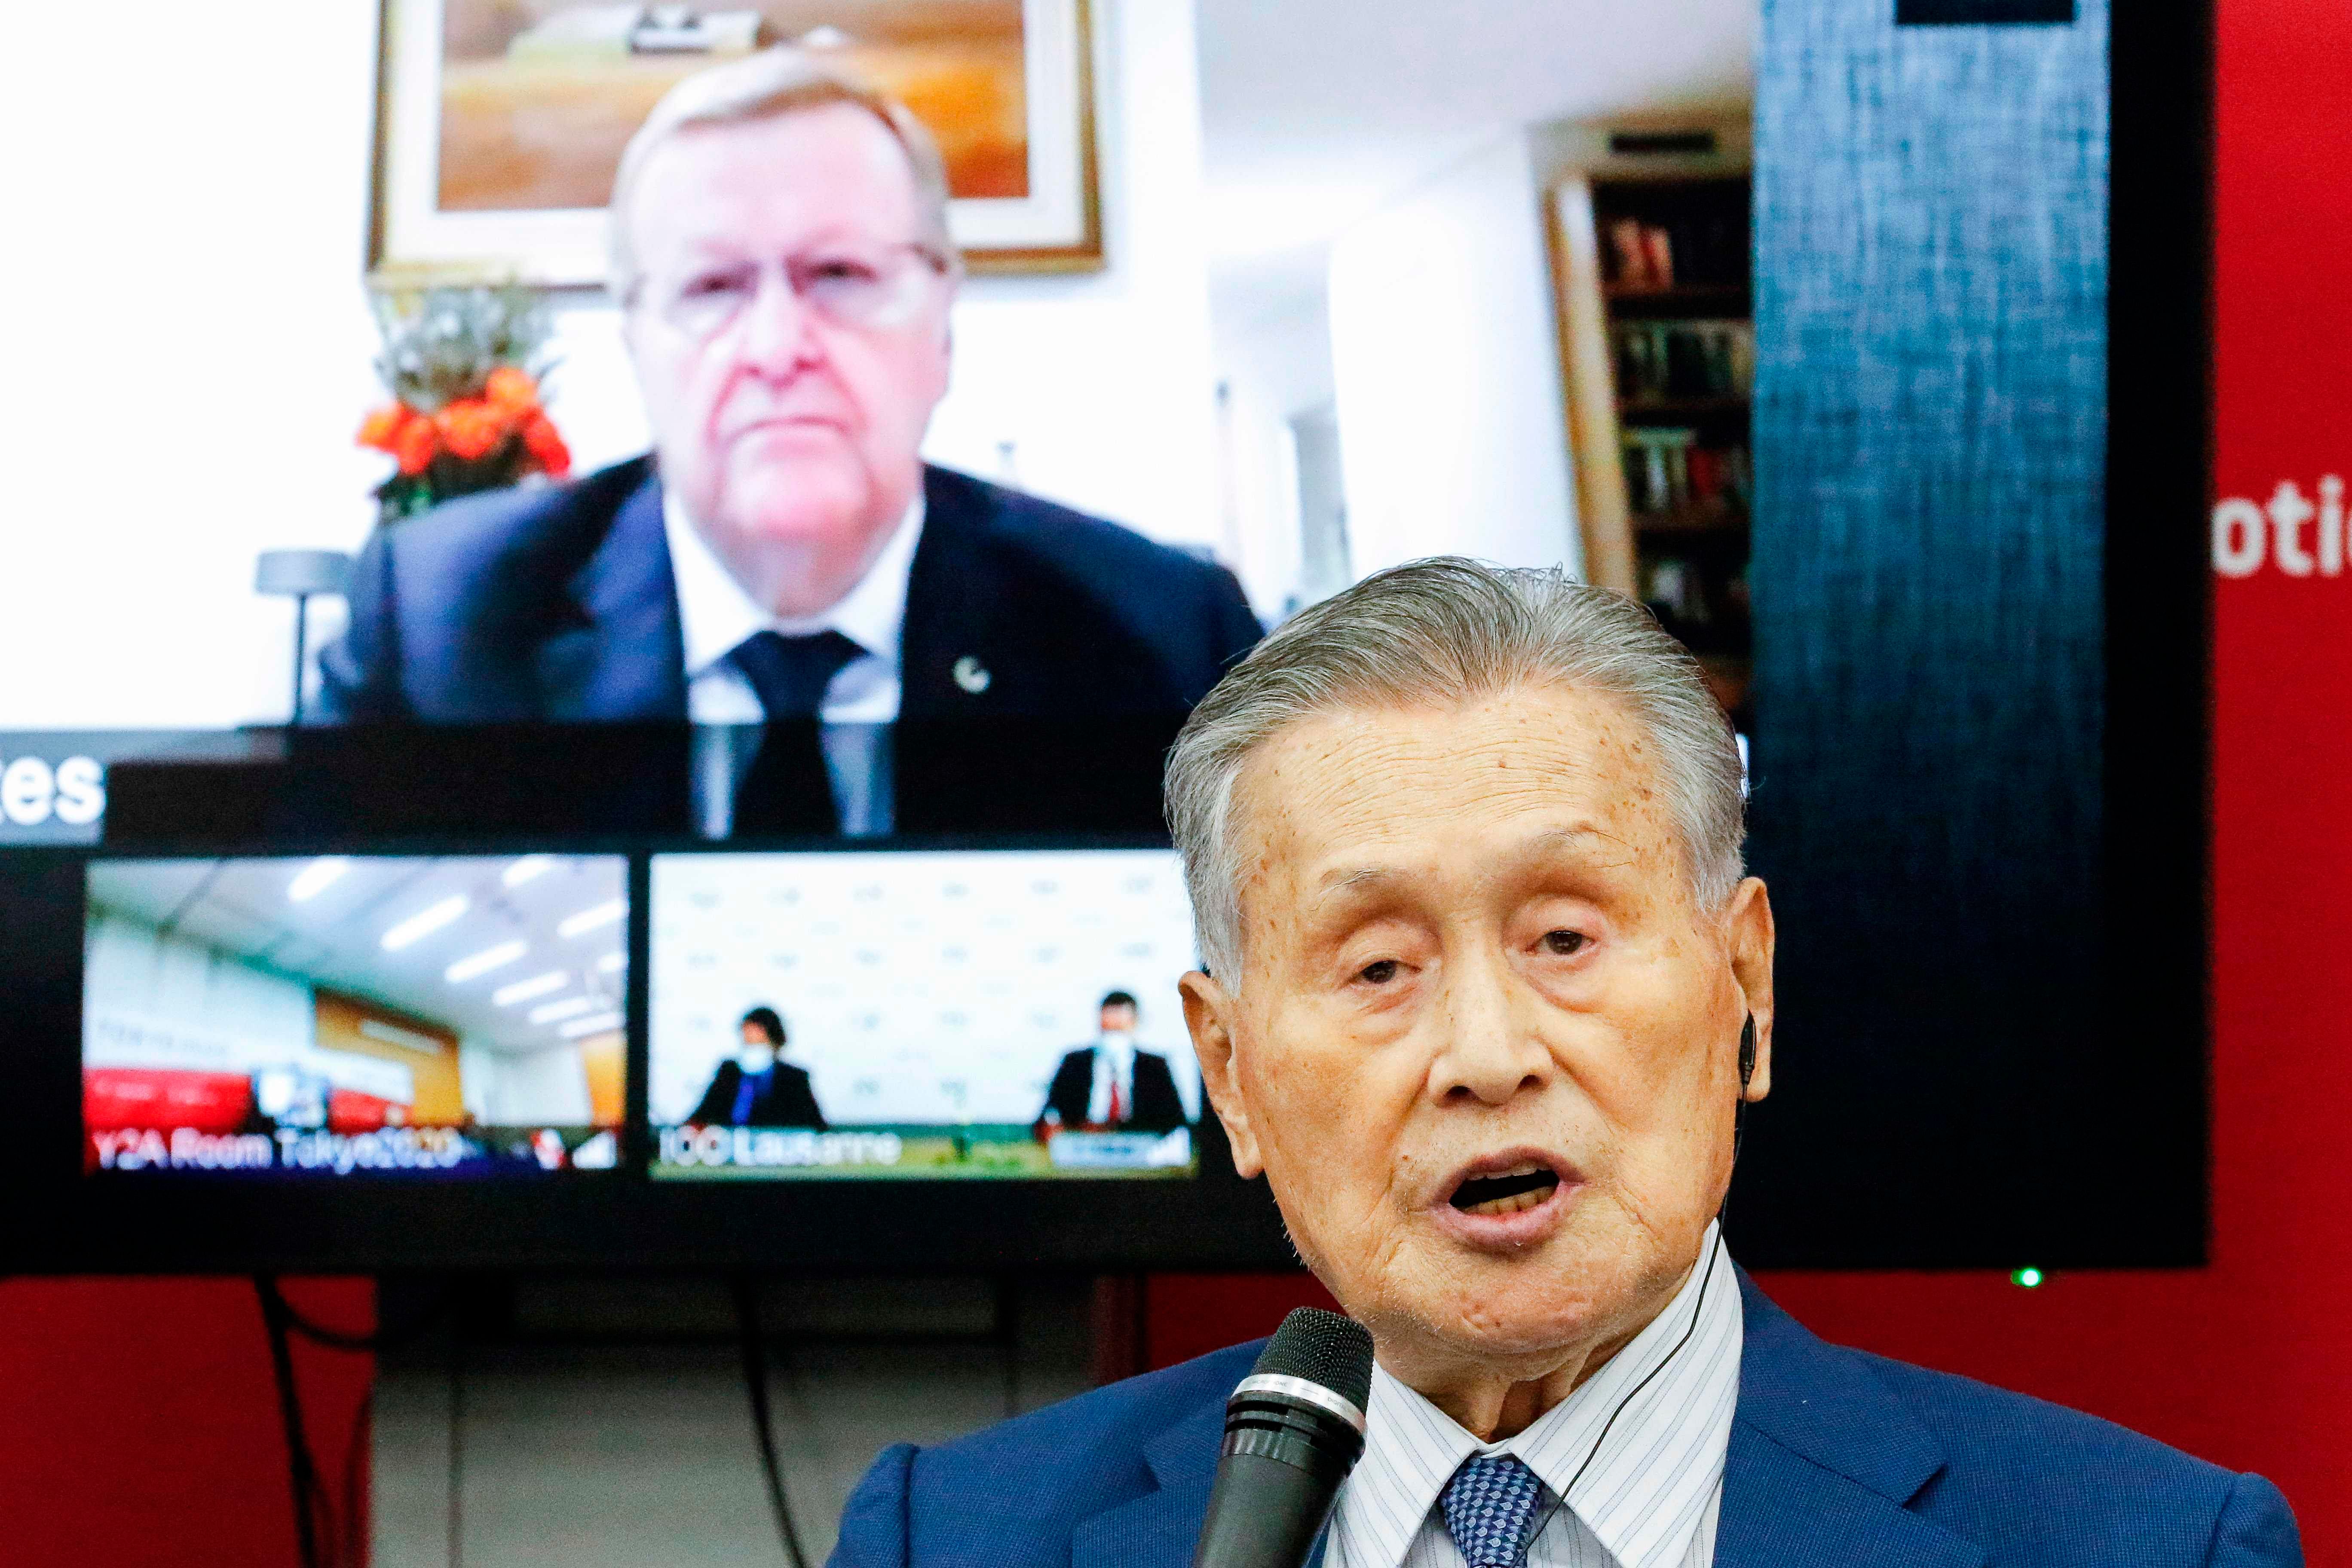 President of the Tokyo 2020 Organising Committee Yoshiro Mori speaks in front of a screen showing chairman of the Tokyo 2020 Olympic Games coordination committee John Coates. Credits: AFP Photo